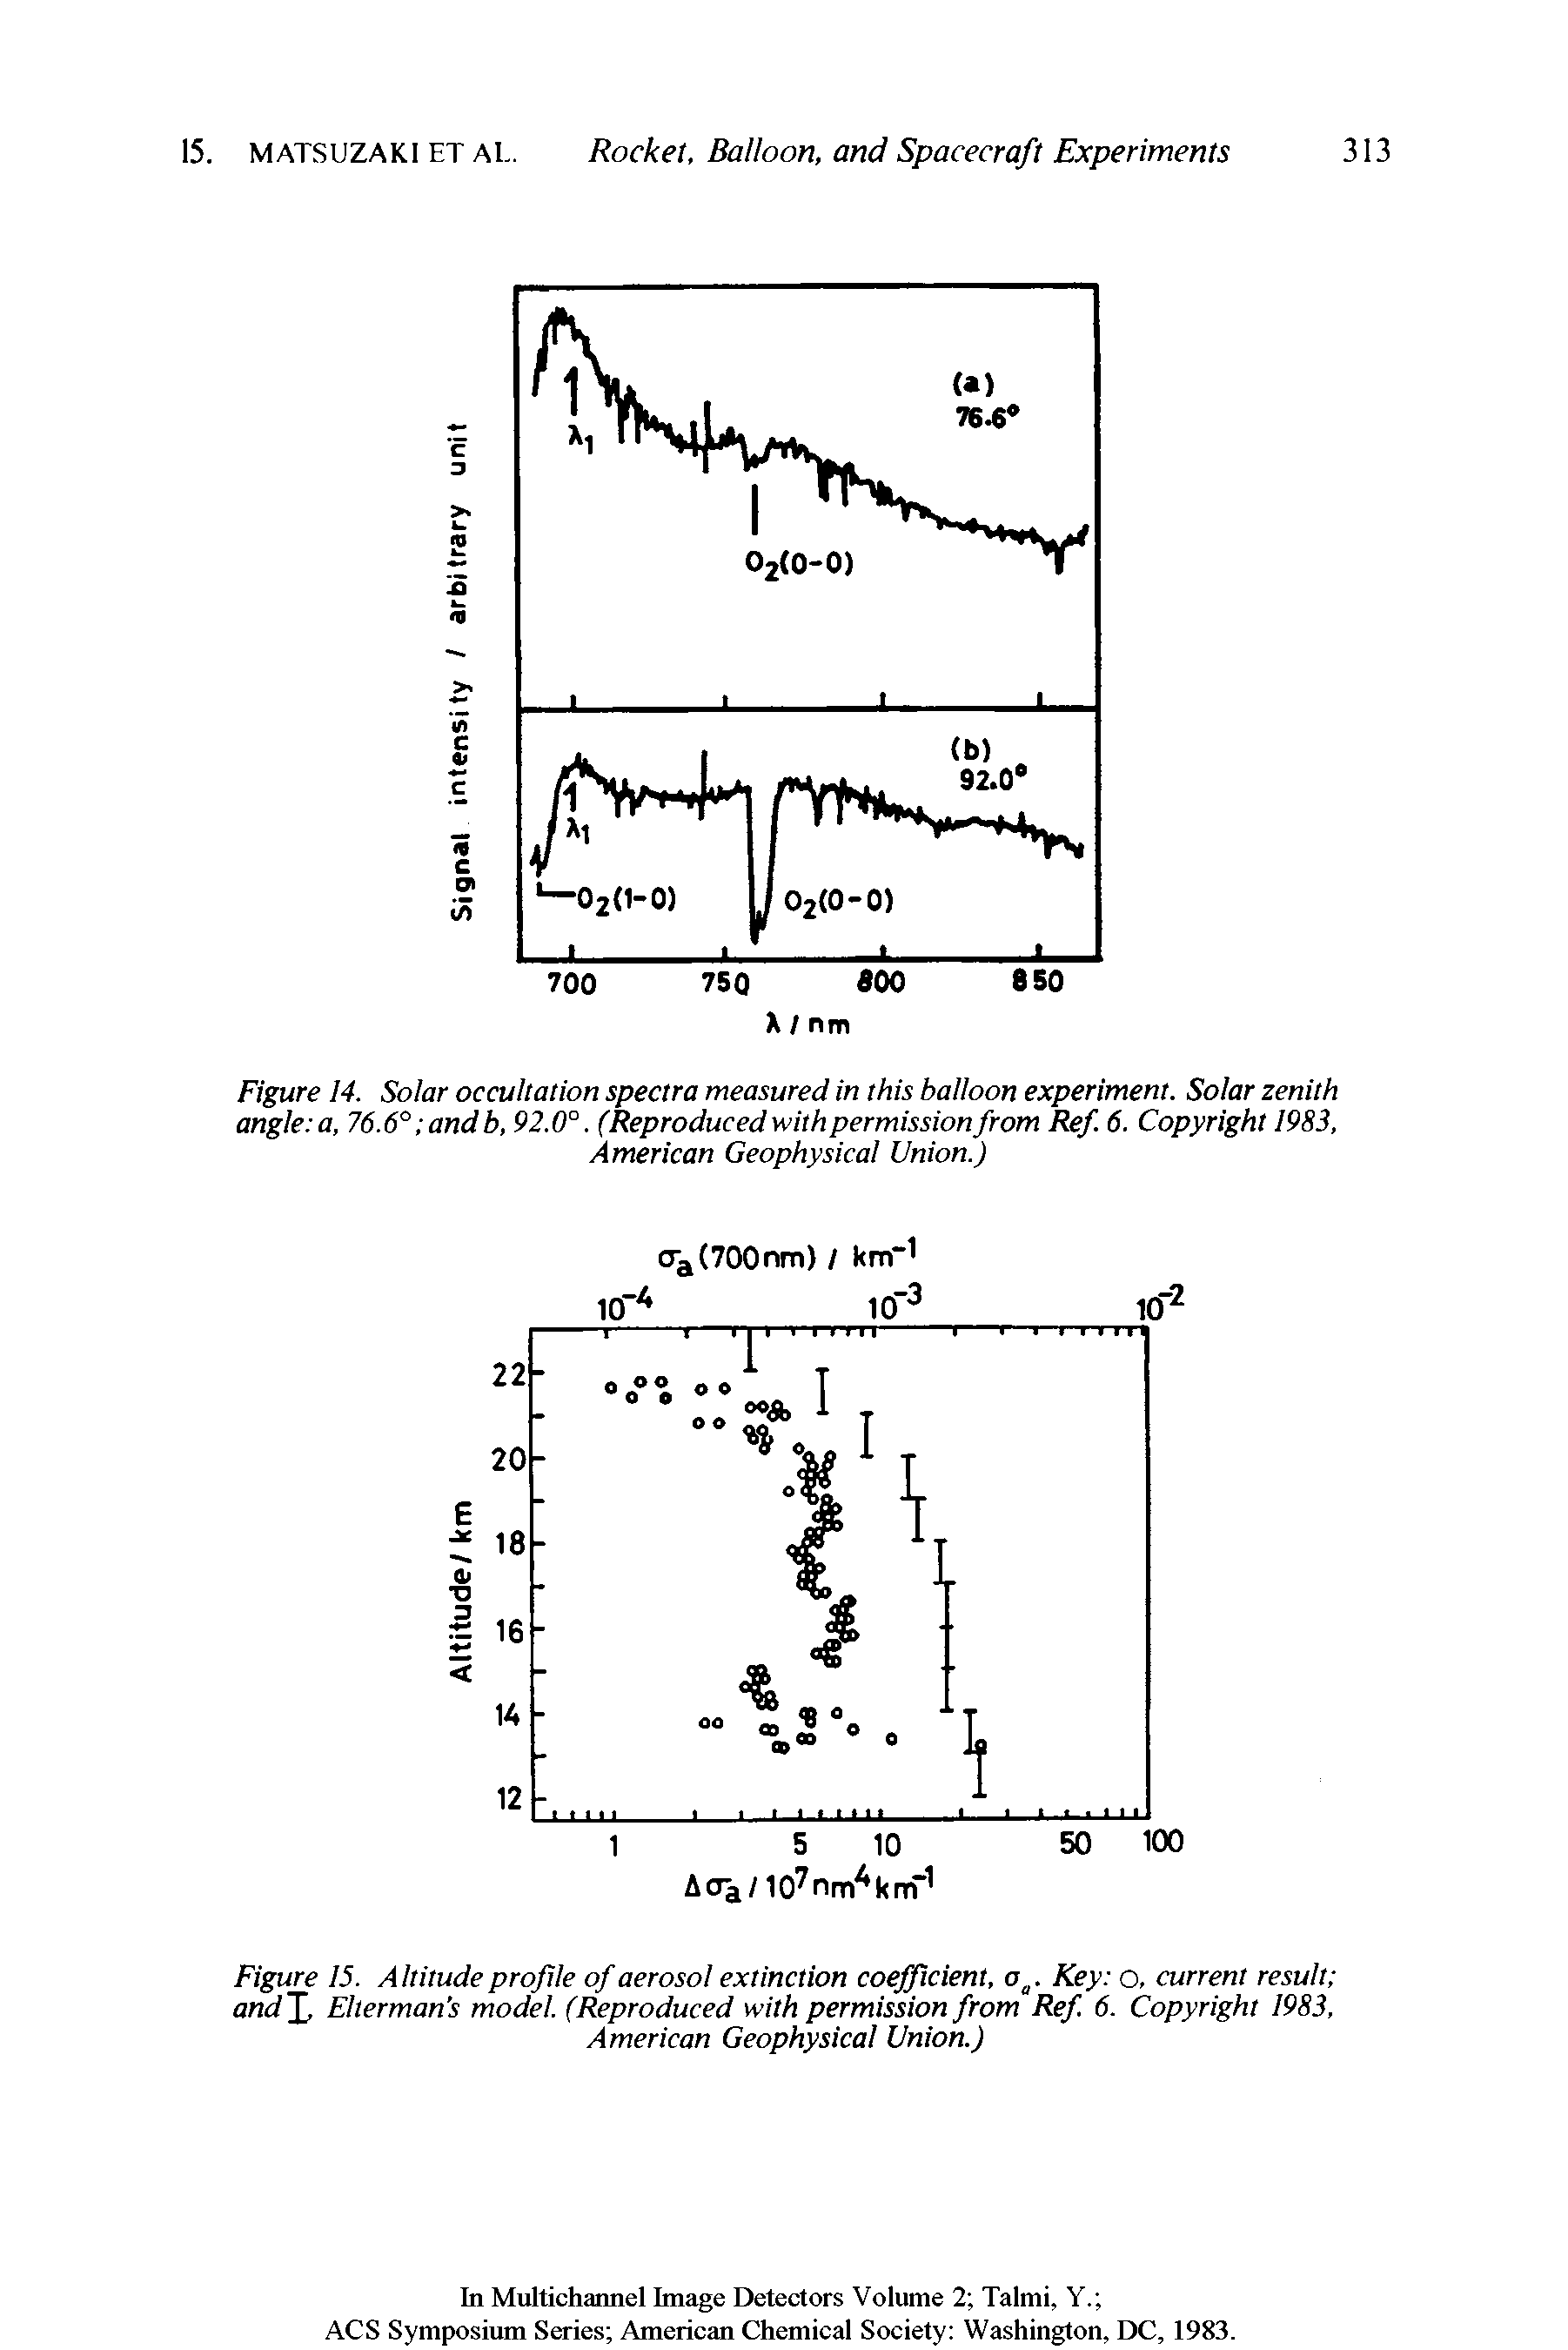 Figure 14. Solar occultation spectra measured in this balloon experiment. Solar zenith angle a, 76.6° and b, 92.0°. (Reproduced with permission from Ref. 6. Copyright 1983, American Geophysical Union.)...